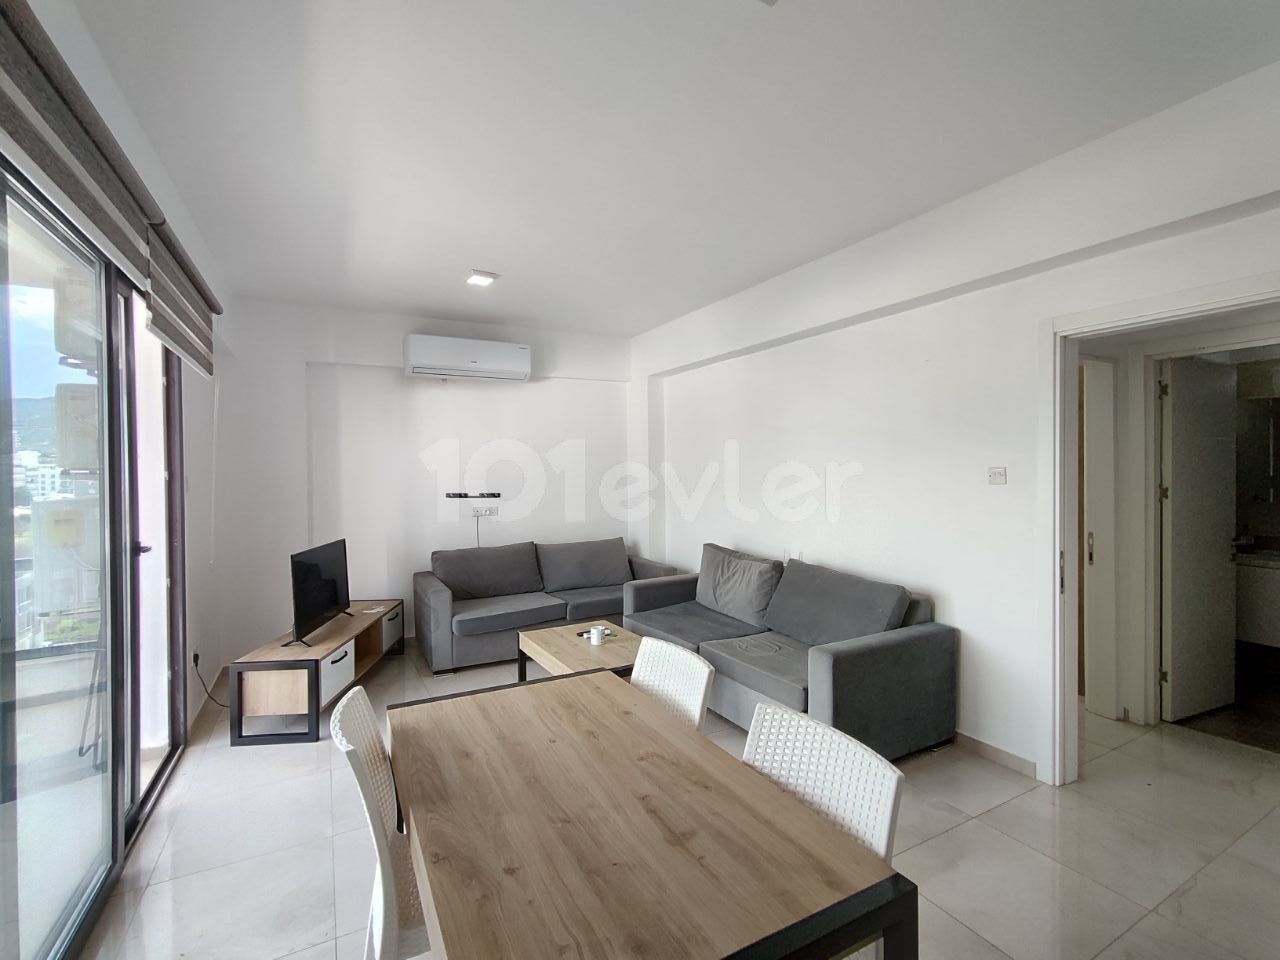 1+1 AND 2+1 FLATS FOR SALE IN LEFKE, NORTHERN CYPRUS